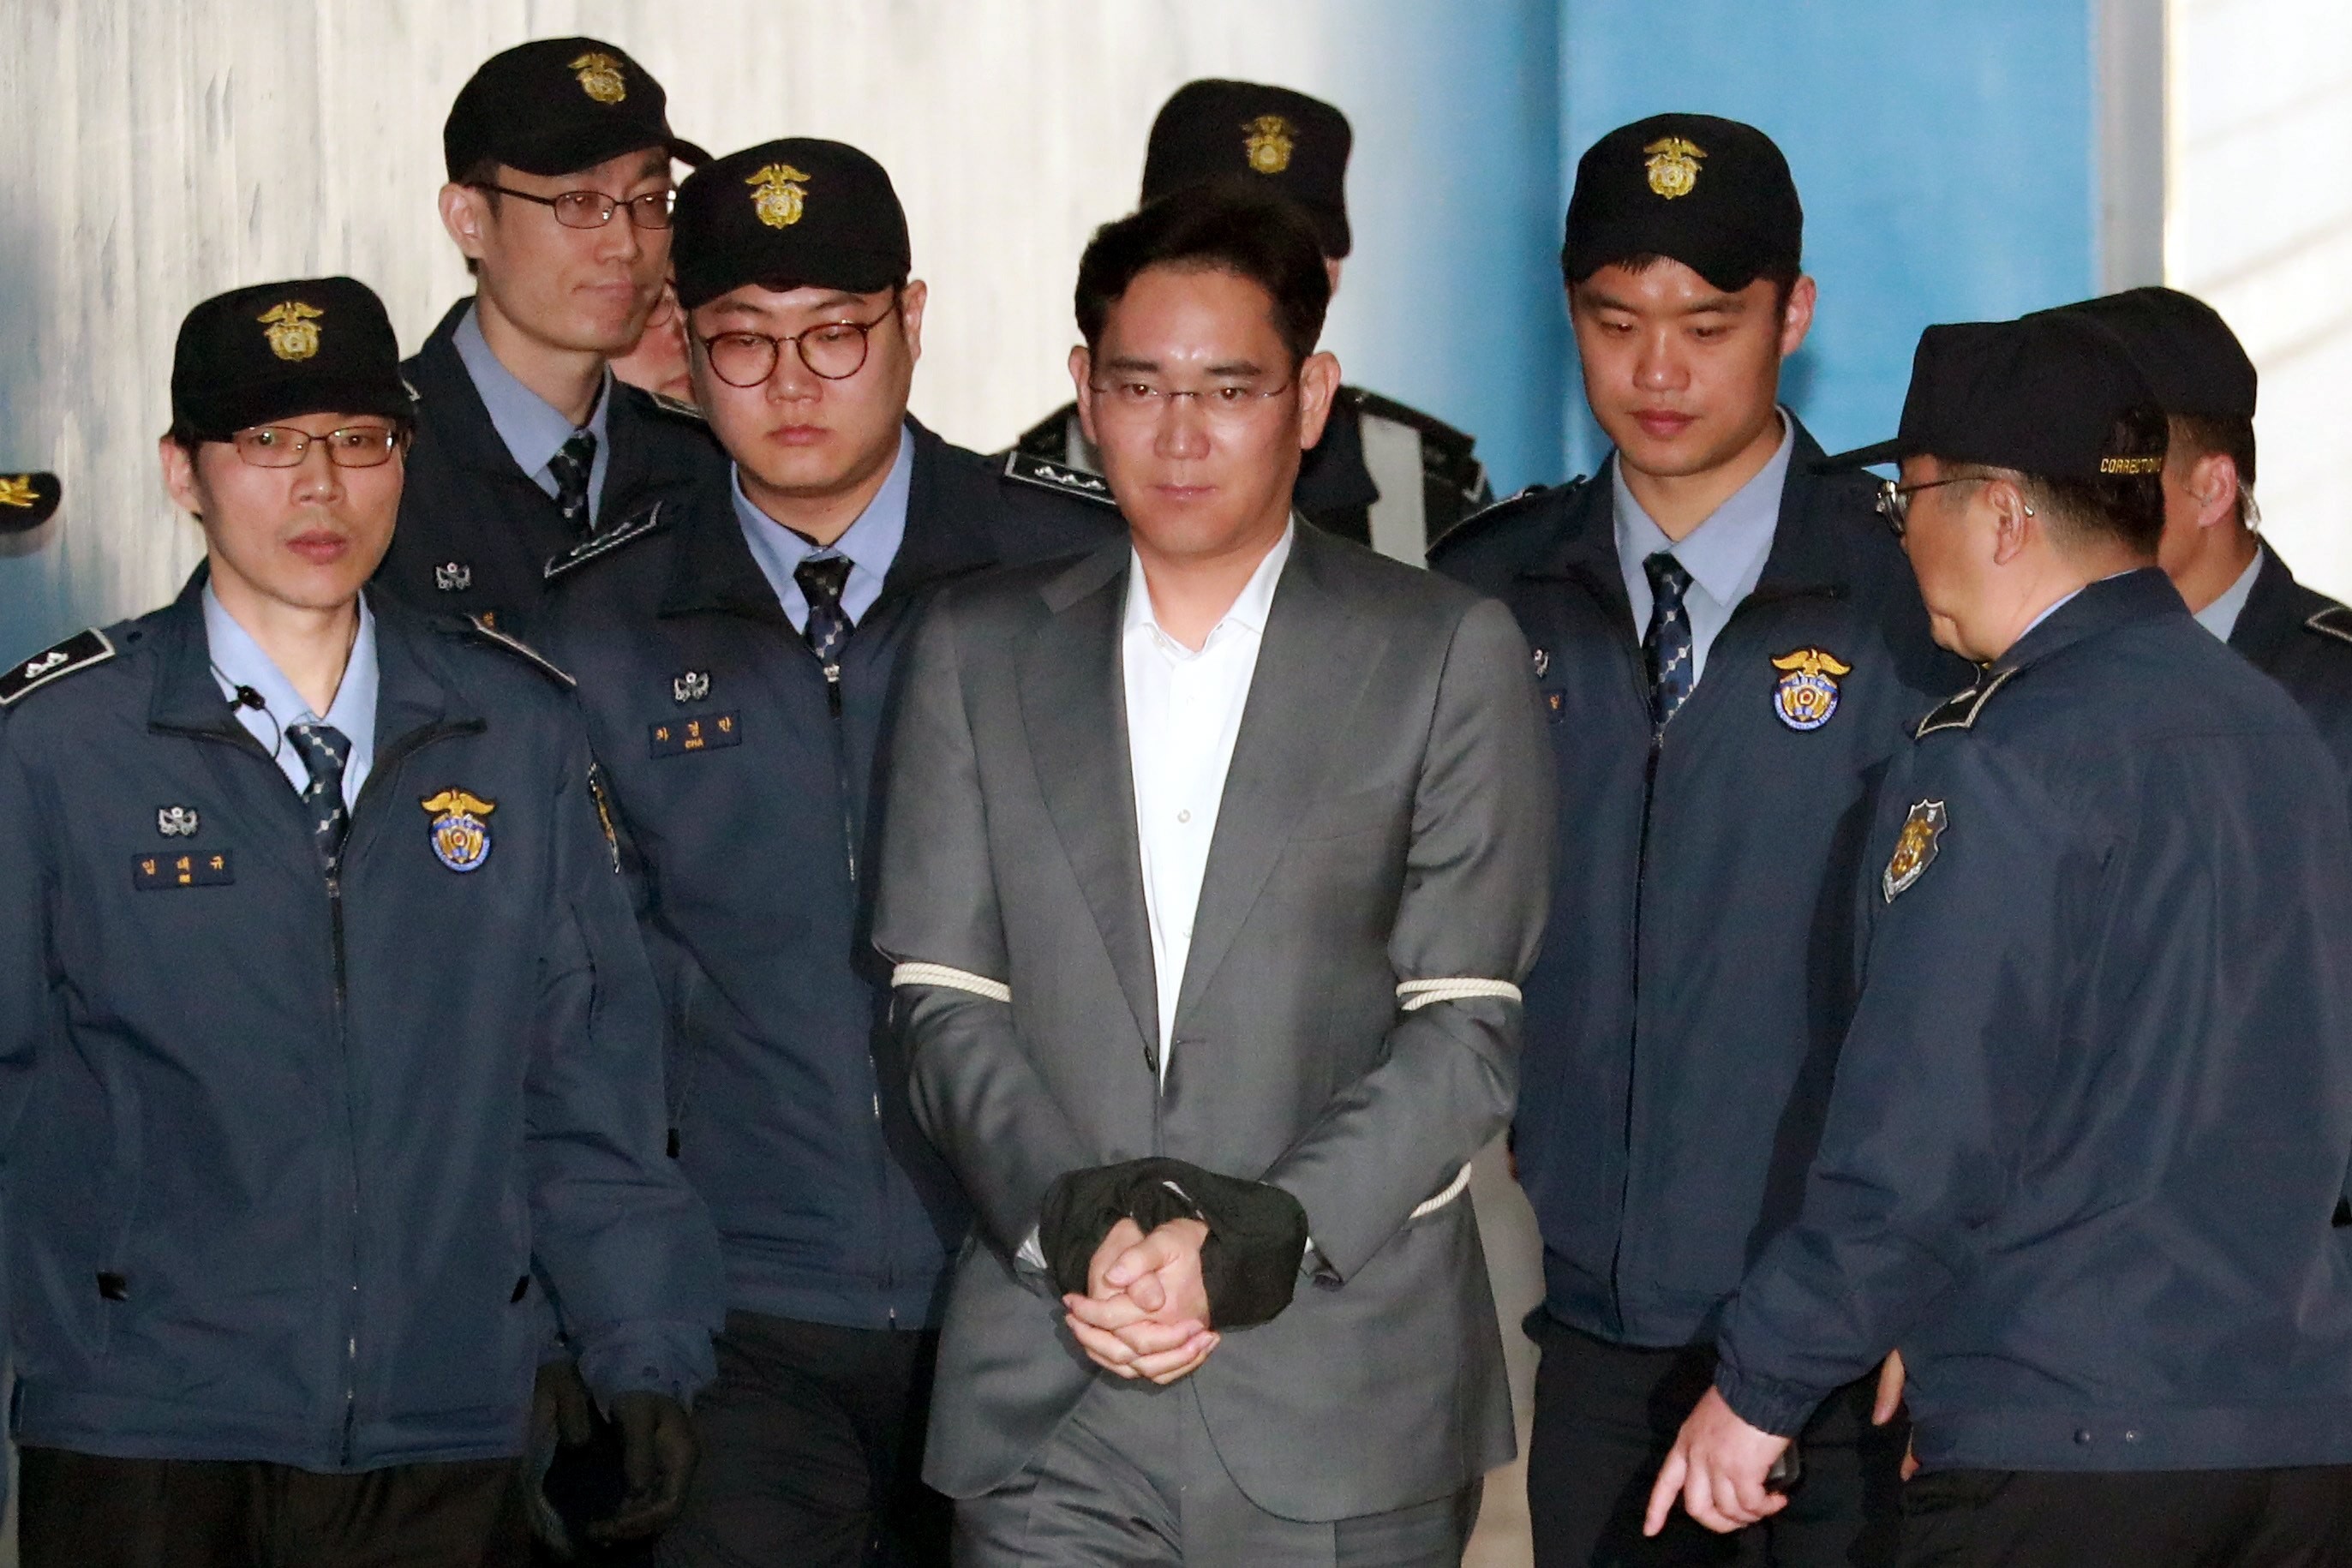 Lee Jae-Yong, vice-chairman of Samsung Group, arrives to face trial at the Seoul Central District Court on April 7, 2017. Photo: EPA